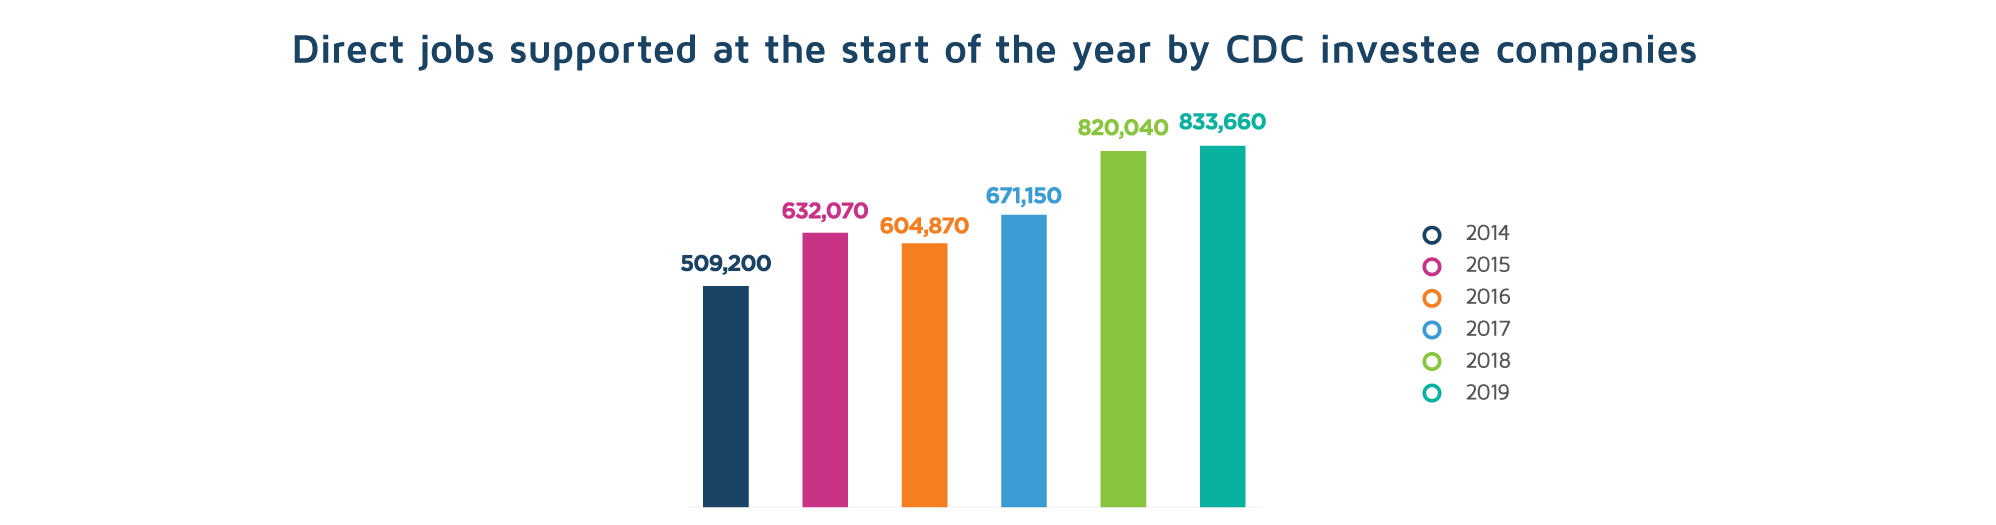 Direct jobs supported at the start of the year by CDC investee companies